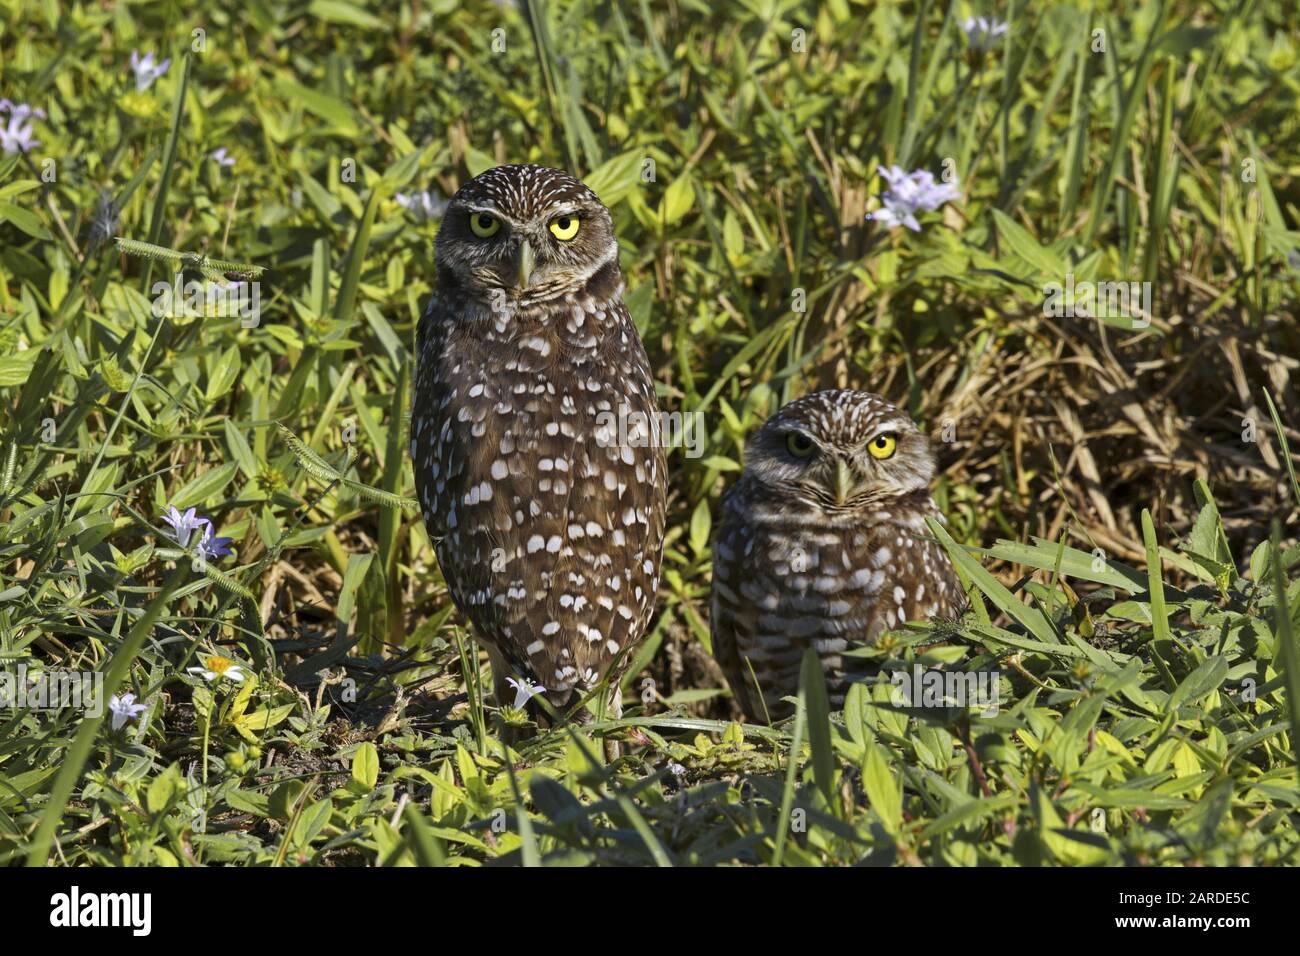 Florida burrowing owls, the official city bird, have special protection in Cape Coral, a Southwest Florida town on the Gulf of Mexico with one of the Stock Photo